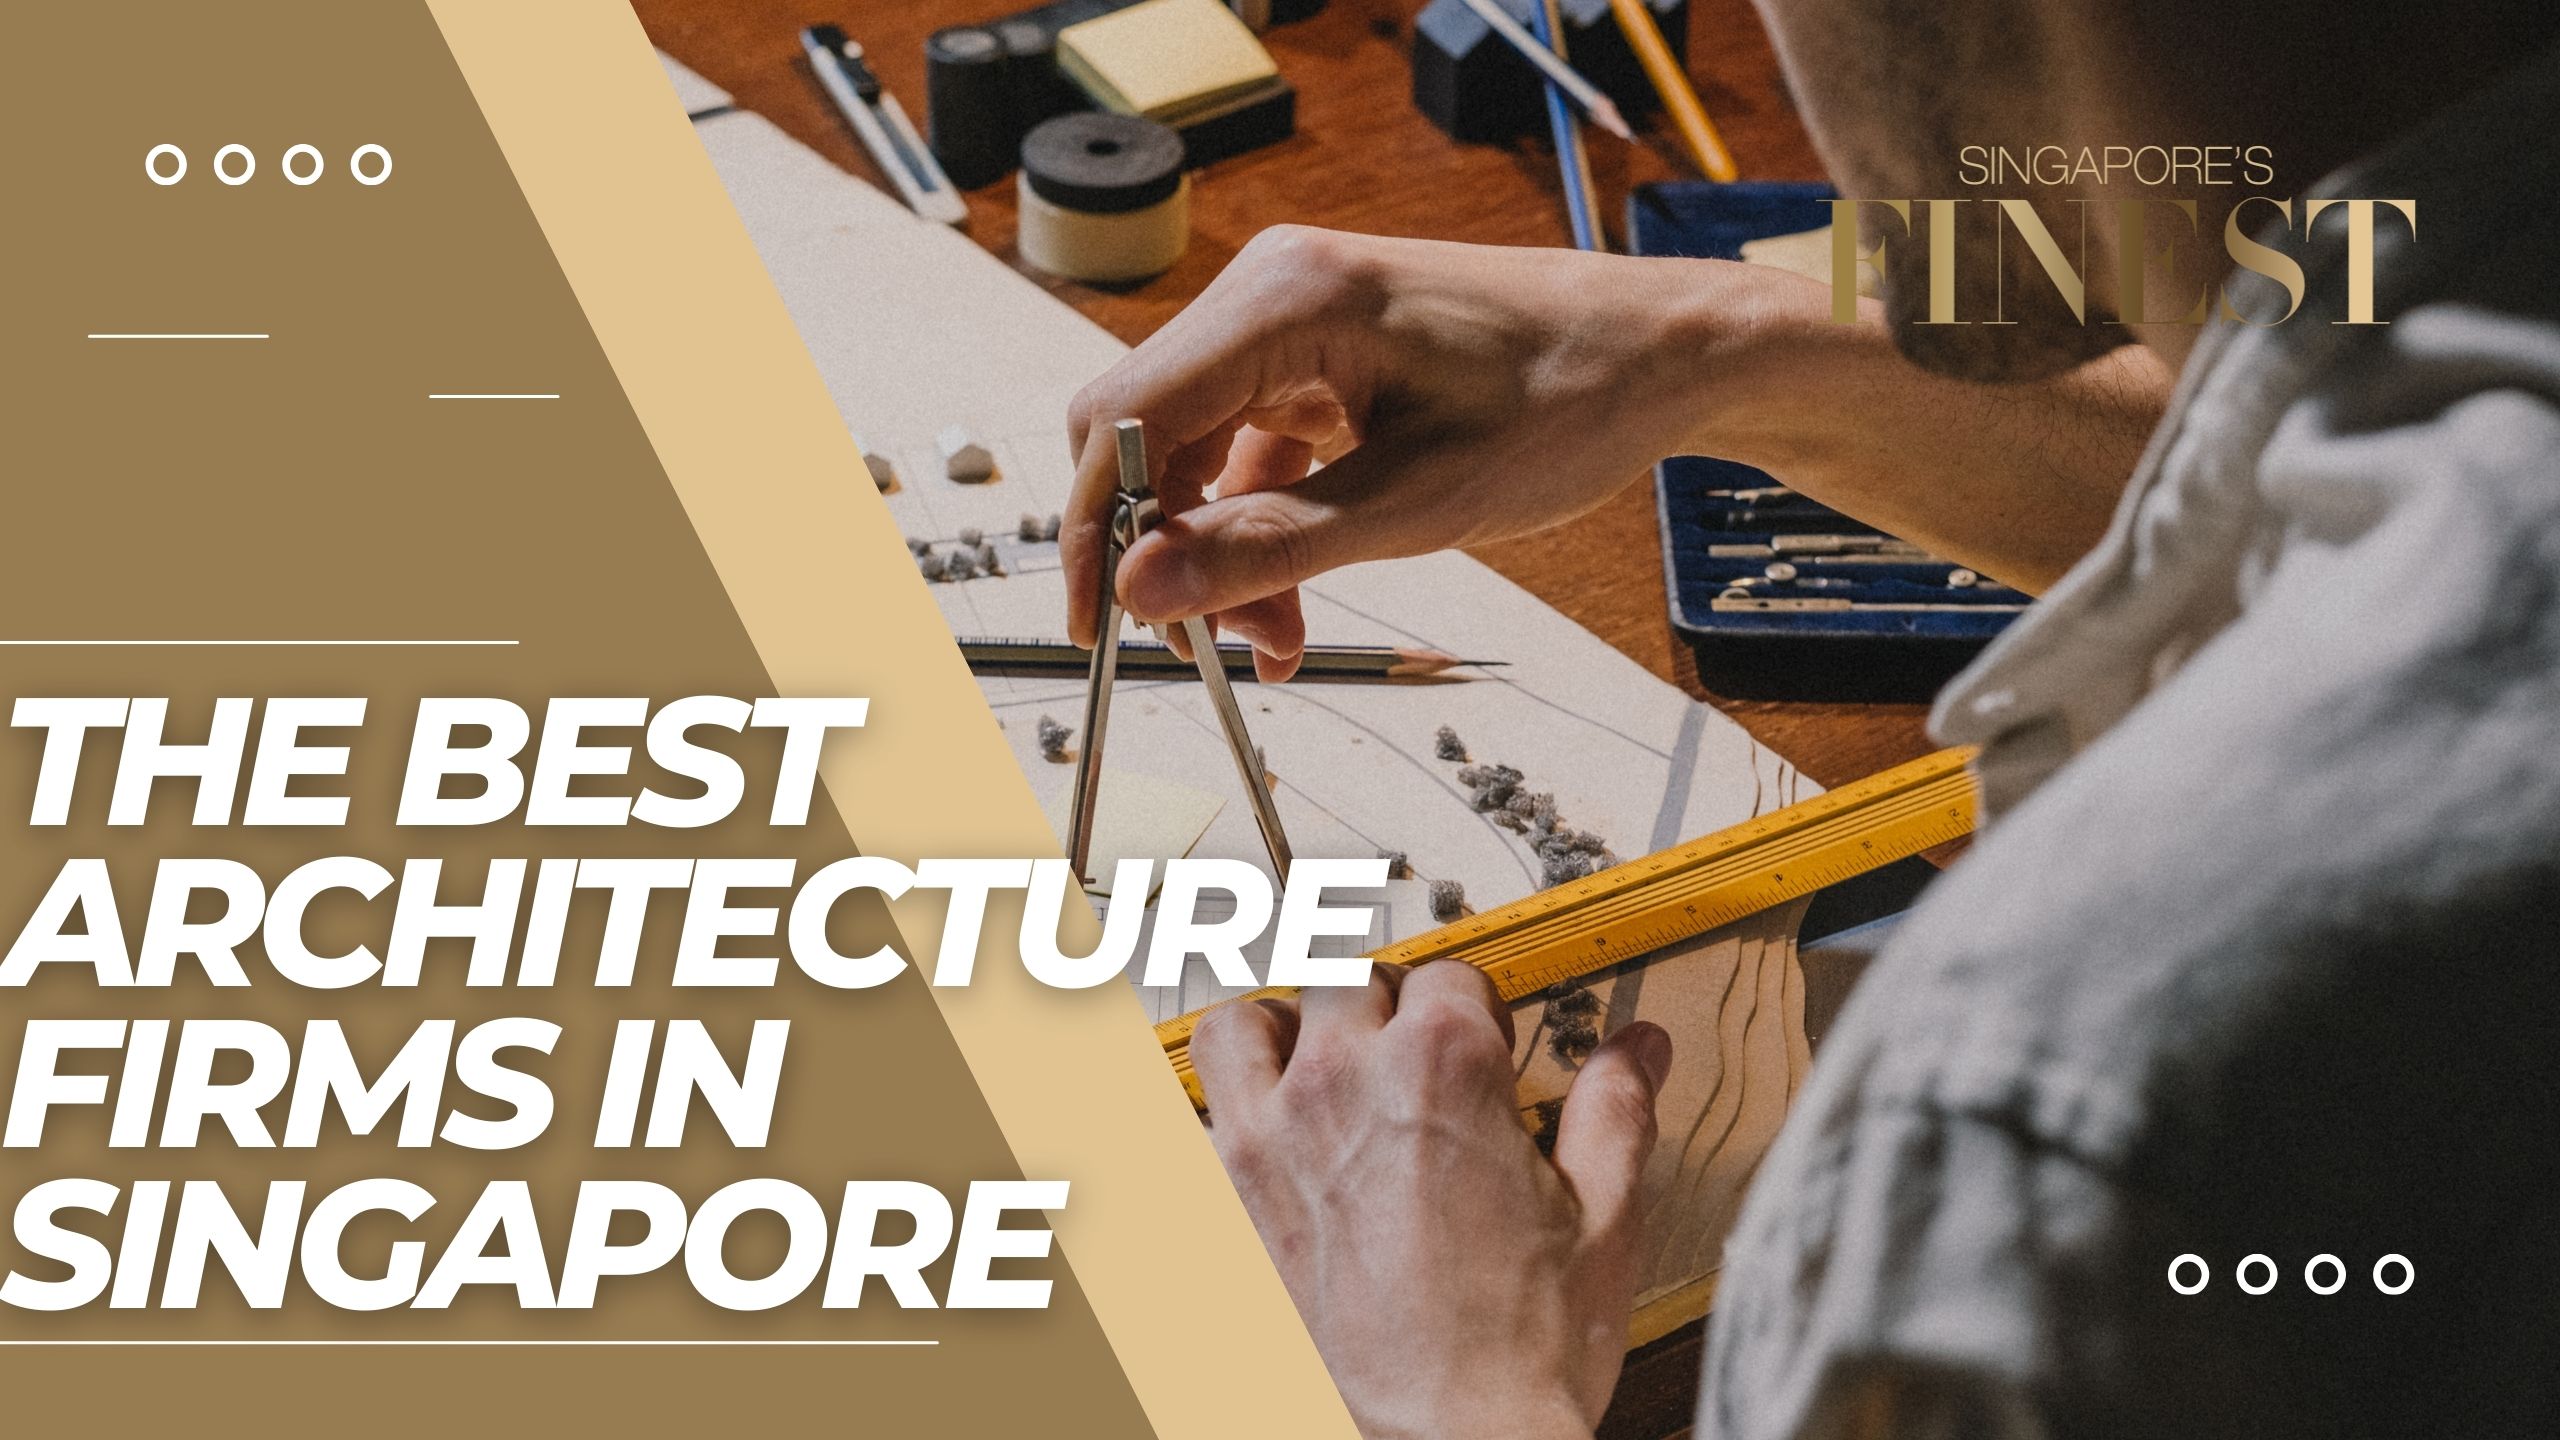 The Finest Architecture Firms in Singapore